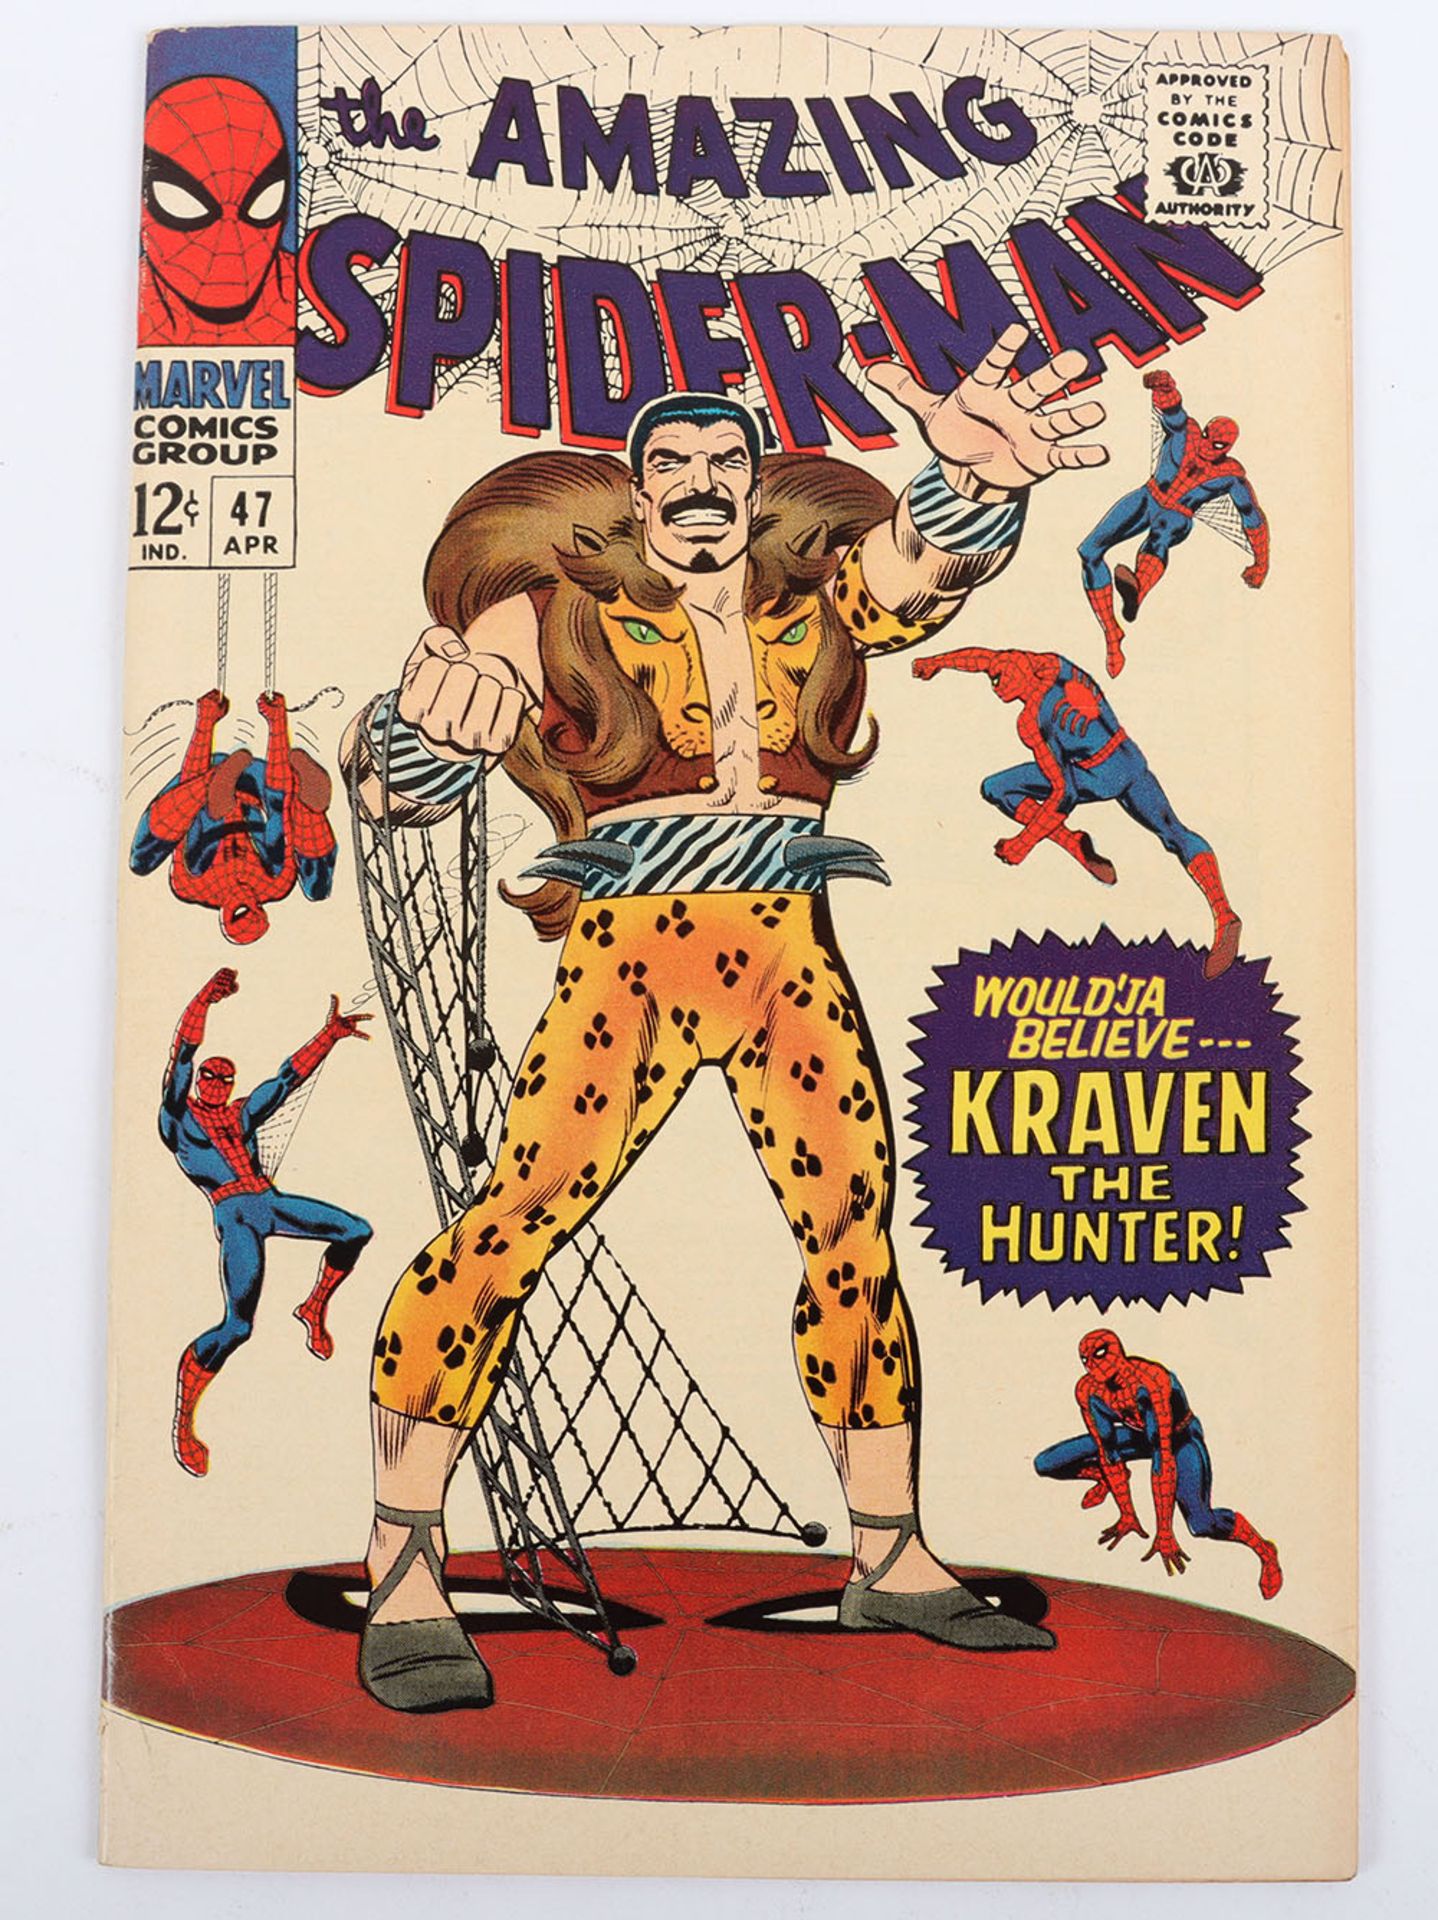 The Amazing Spider-man  No.47  Marvel Silver Age Comic